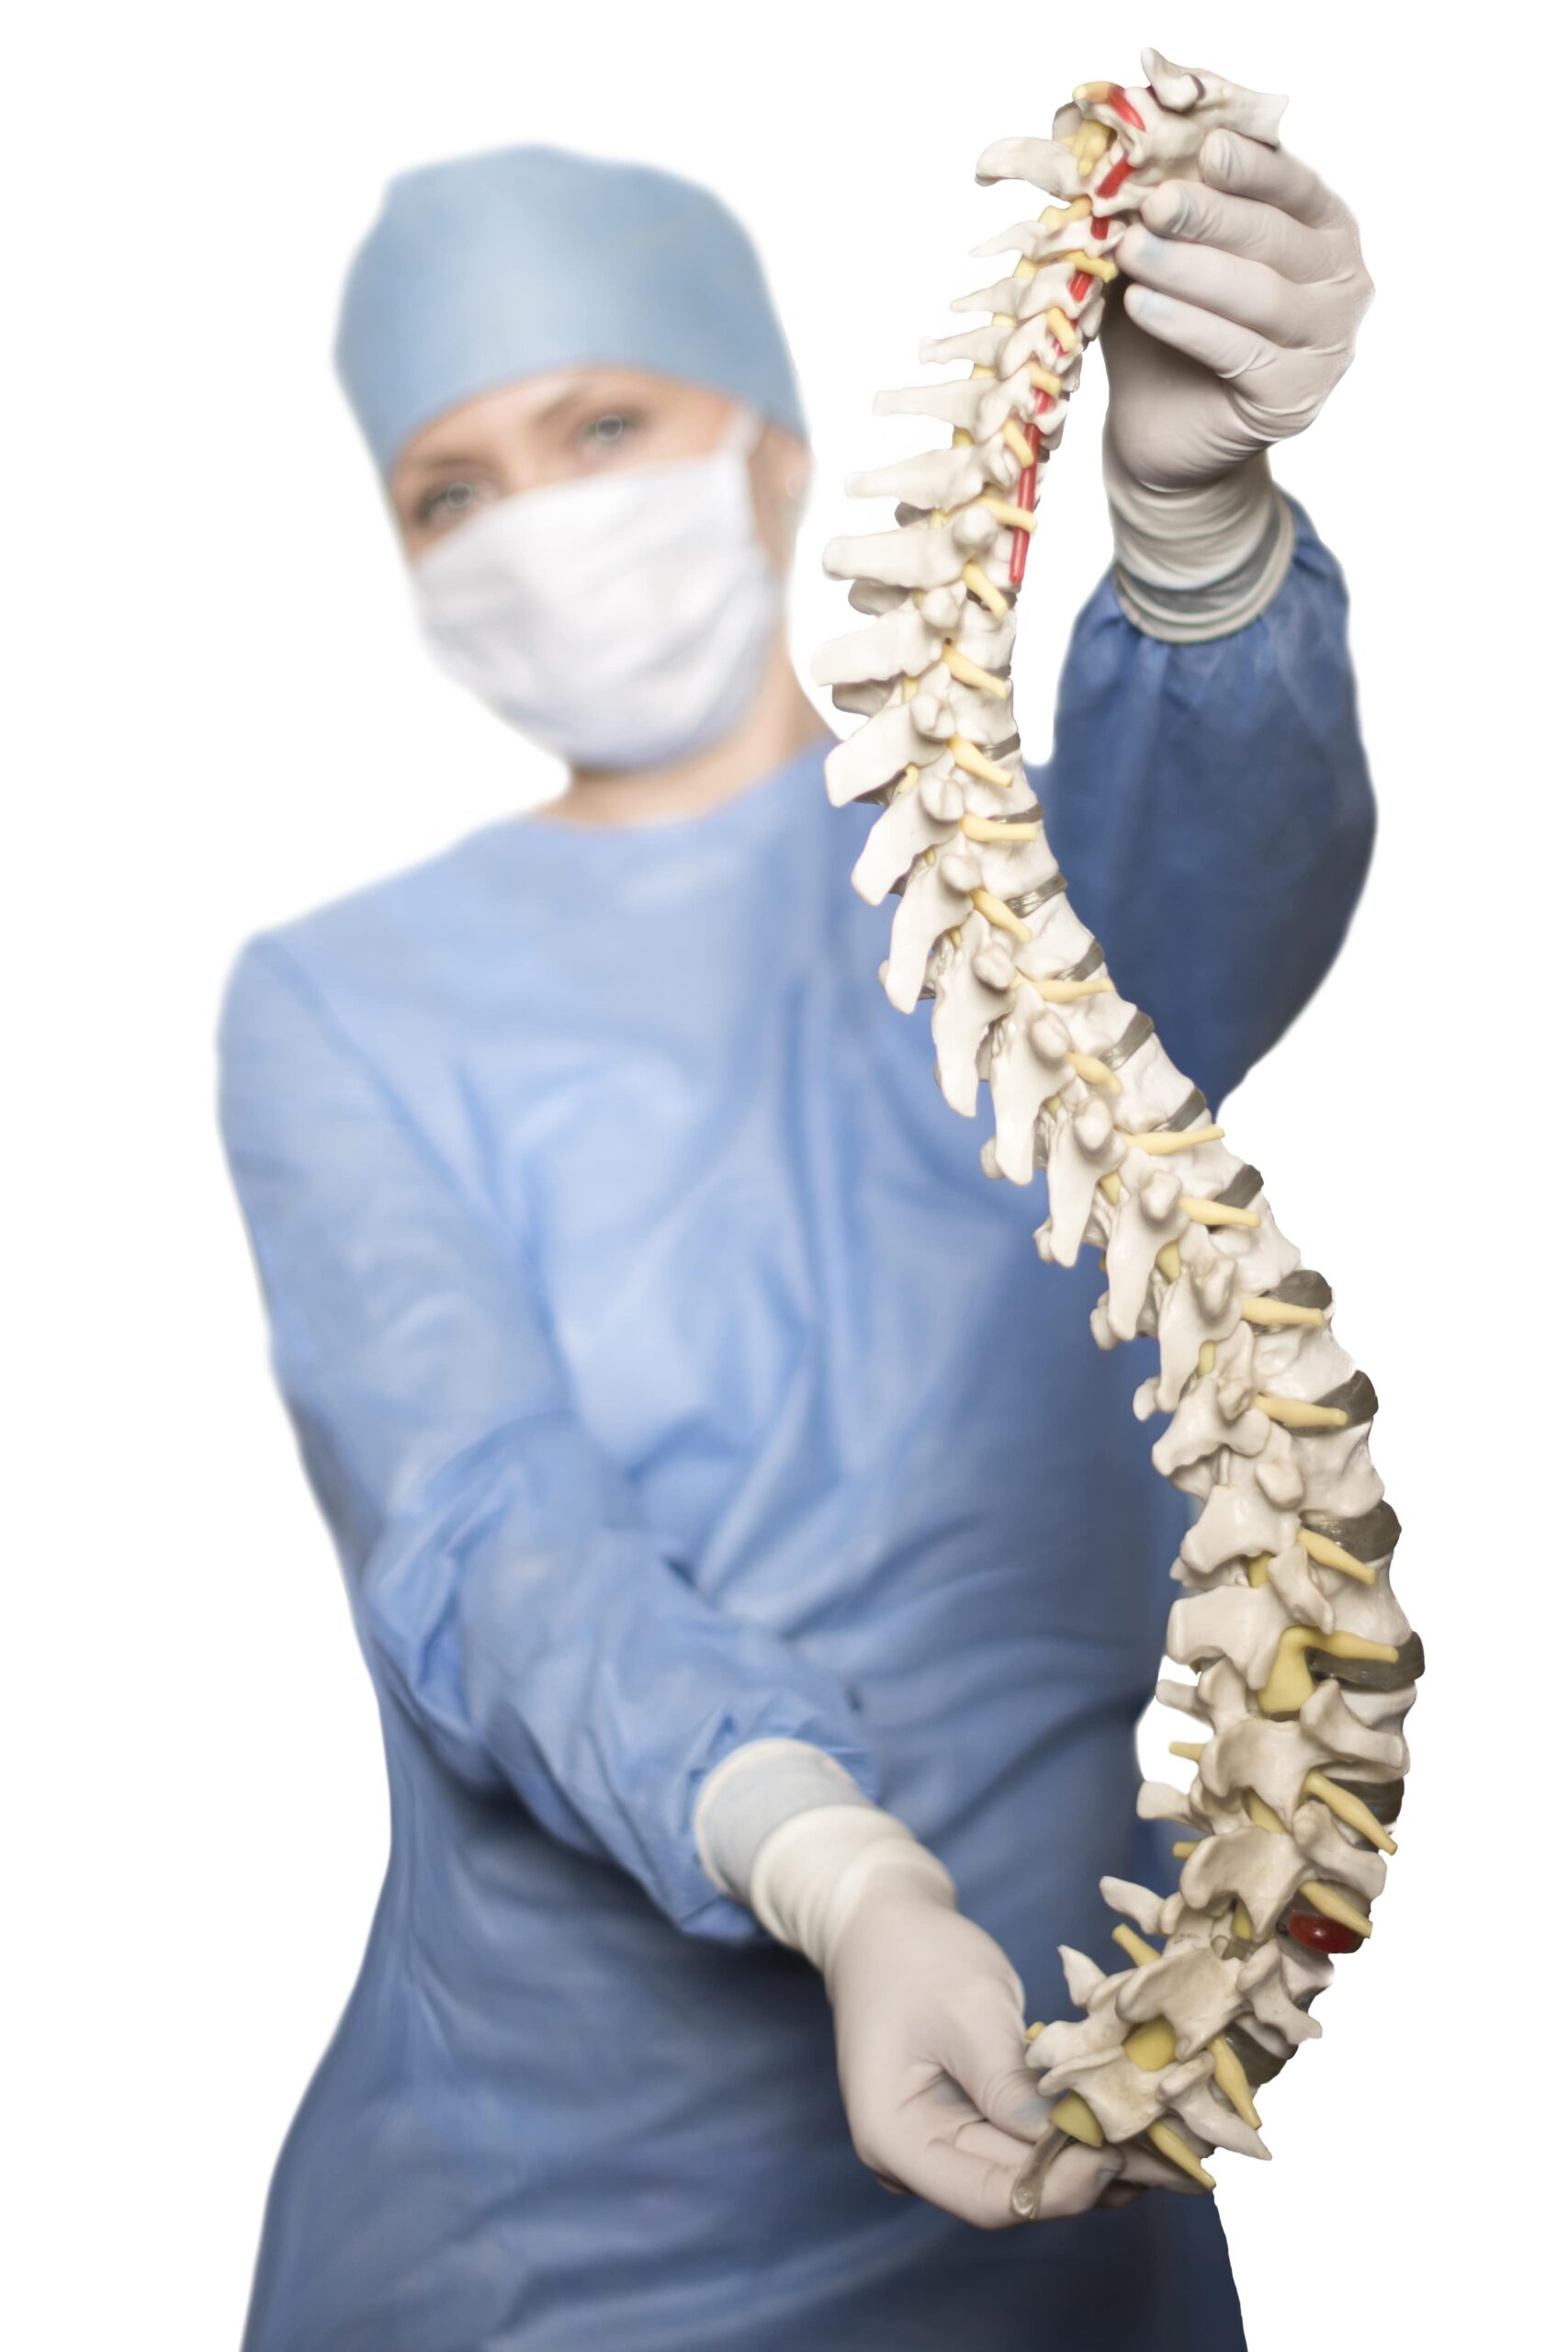 spinal surgeon gowned up holding a human spine